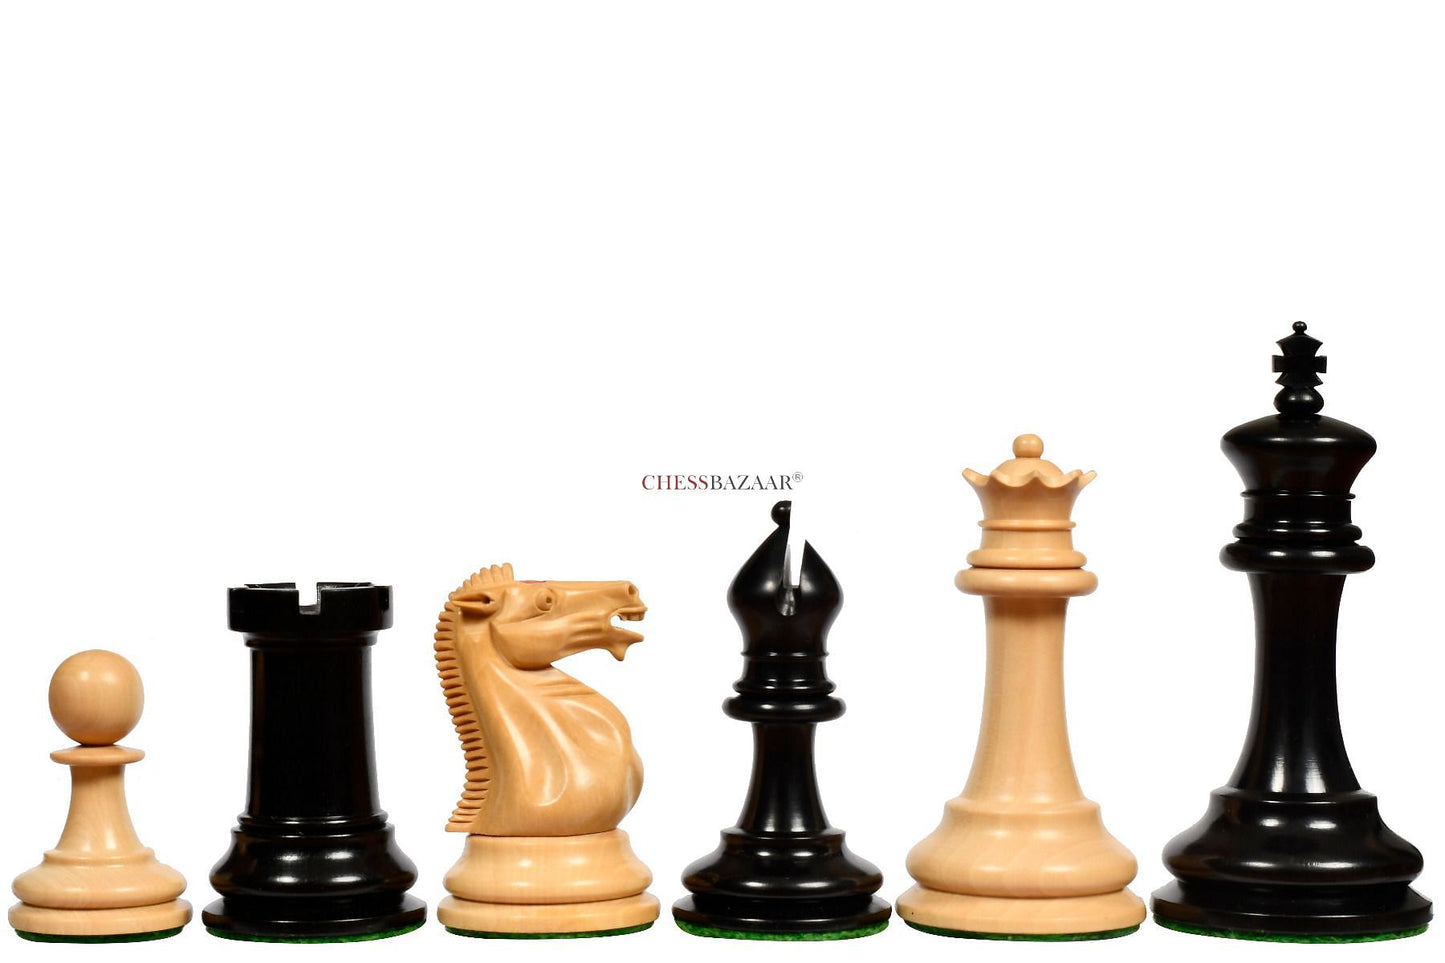 Reproduced Antique 1865-70 Steinitz Staunton Pattern Chess Pieces in Ebony / Box Wood with King Side Stamping - 3.75" King